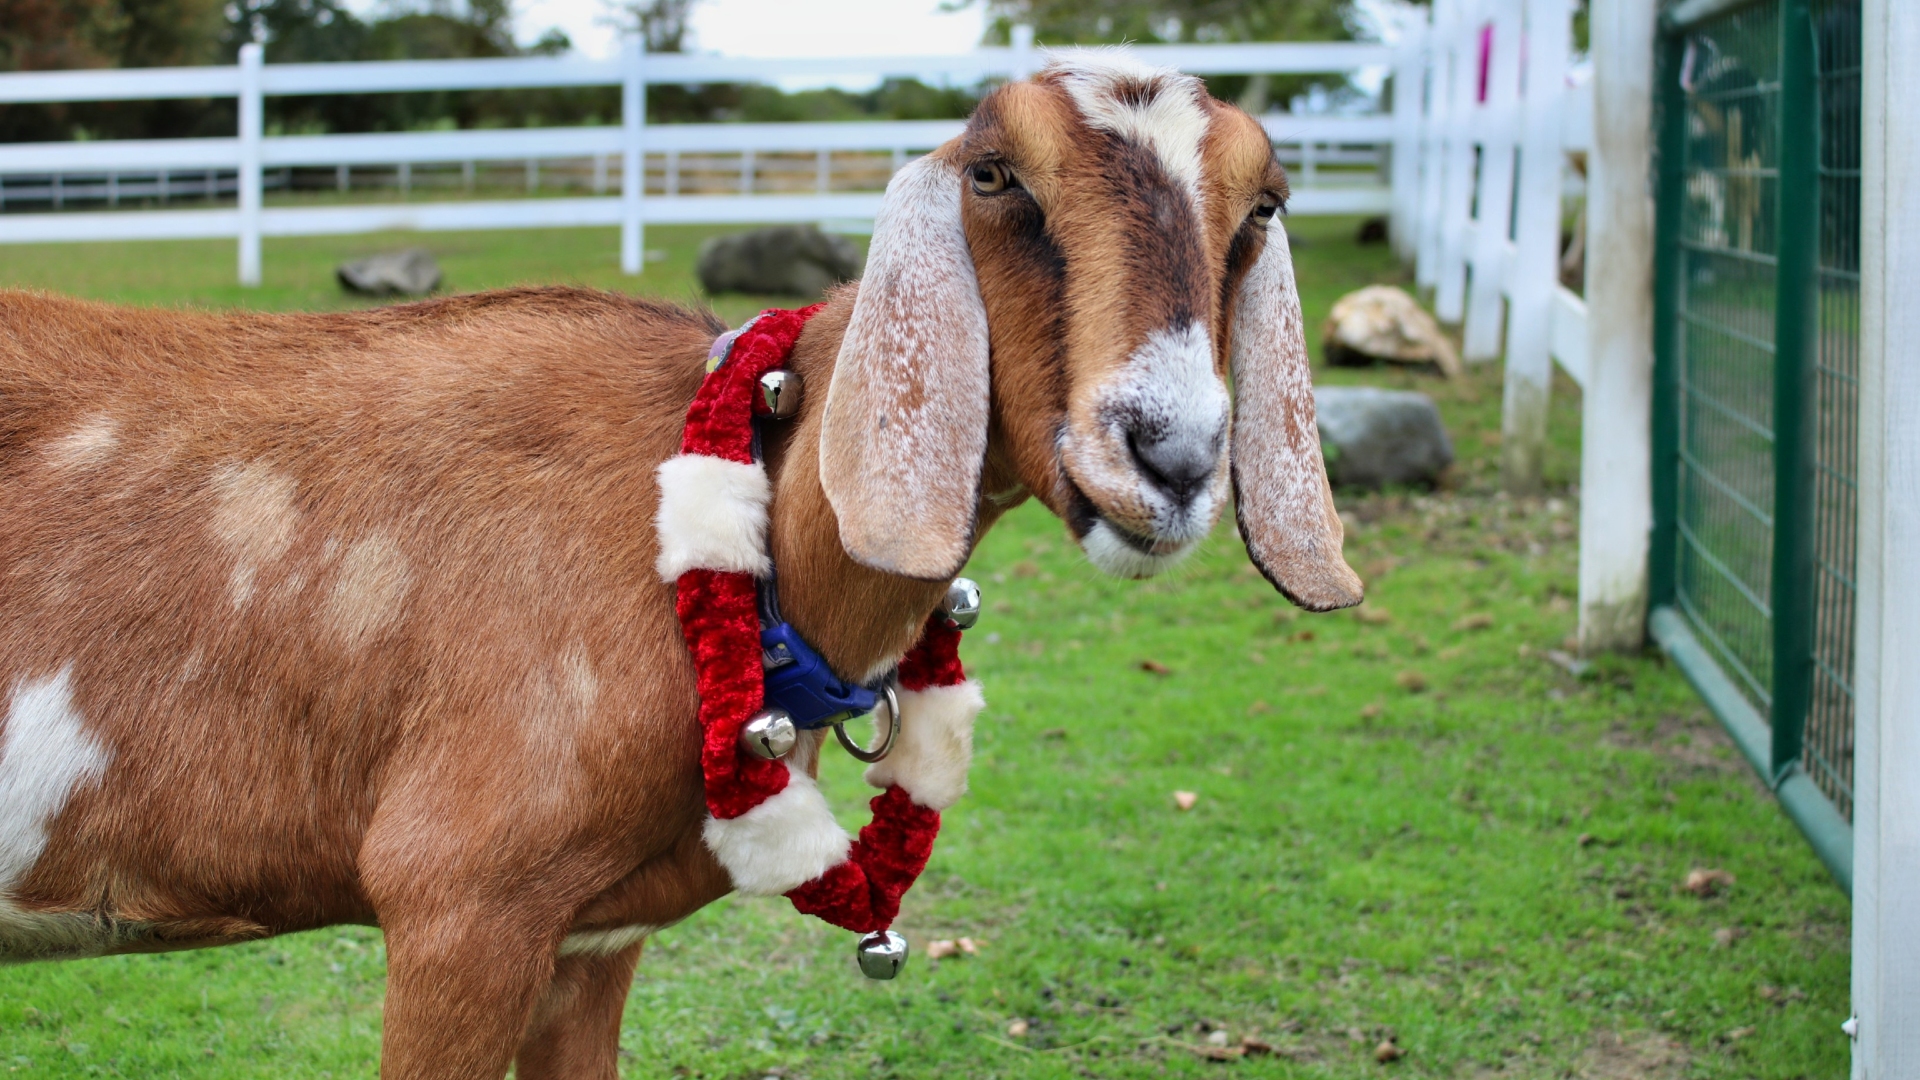 West Place Animal Sanctuary to host Holiday Shop & Stroll Nov. 24 – 26